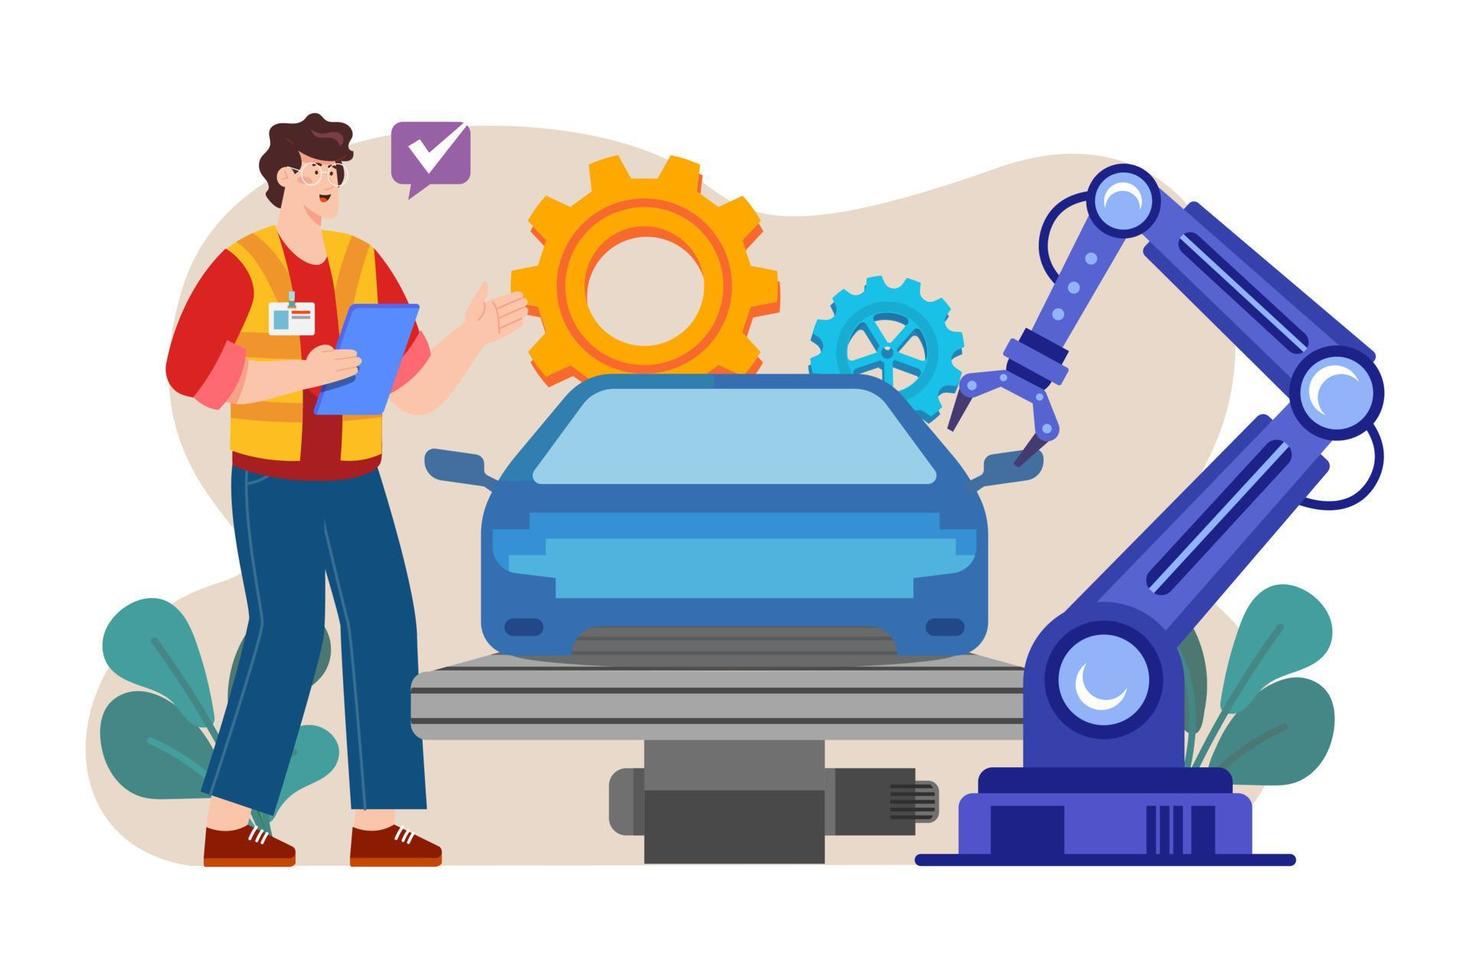 Automated car production Illustration concept on white background vector